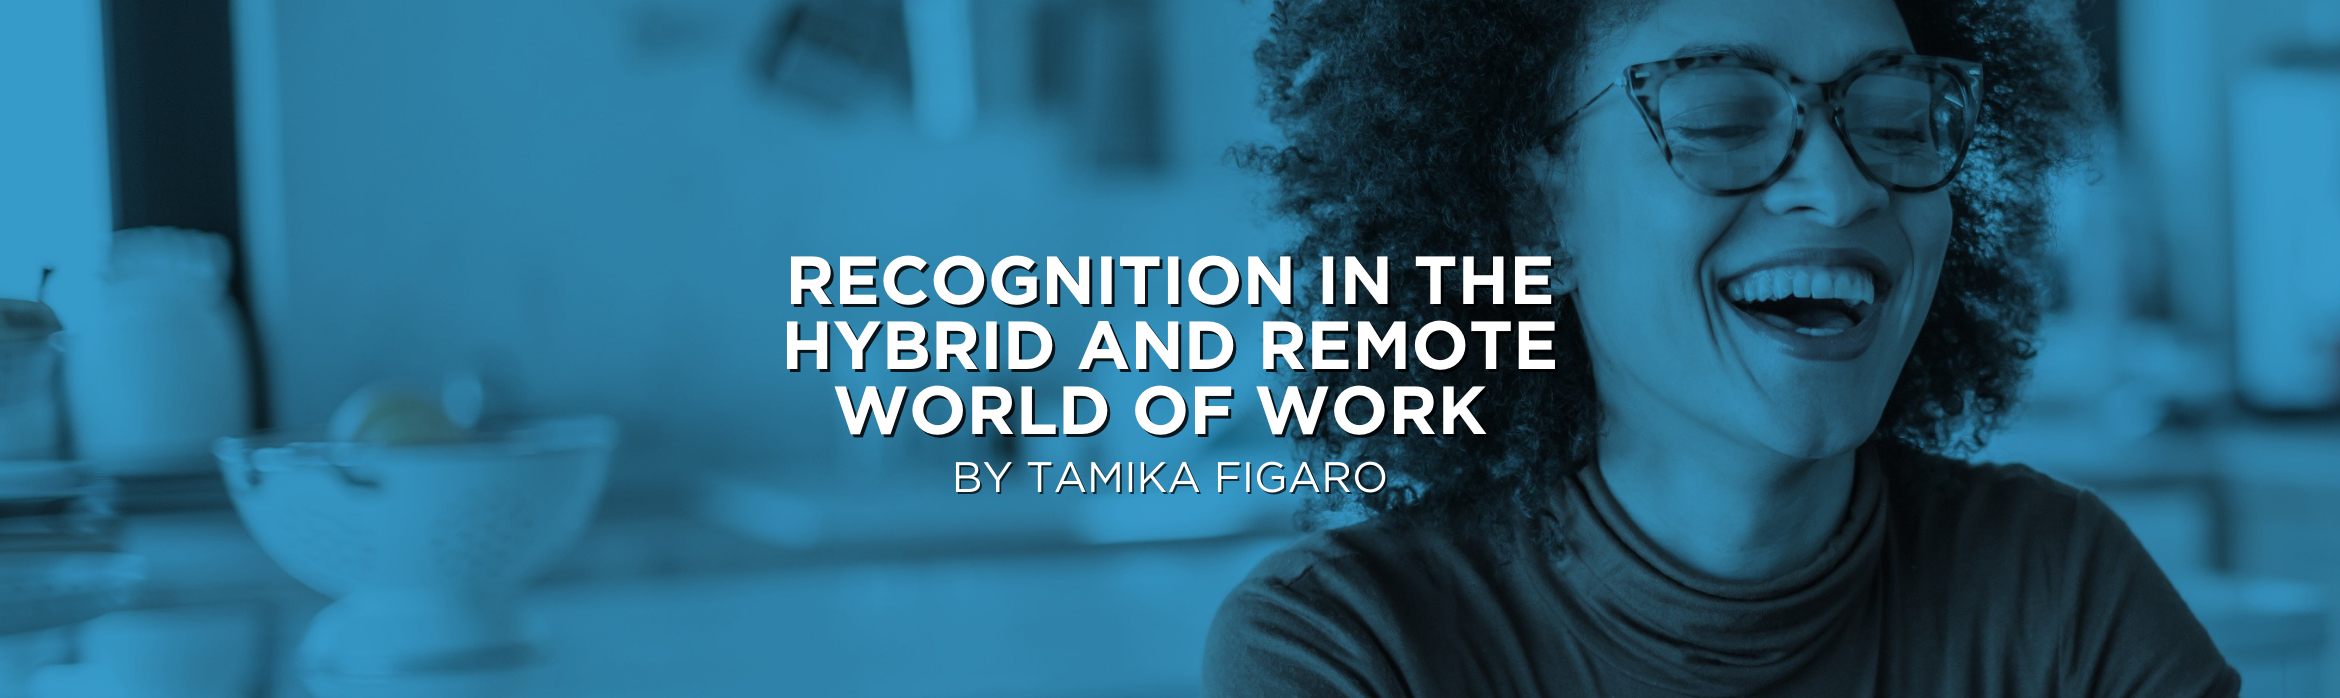 Recognition in the Hybrid and Remote World of Work